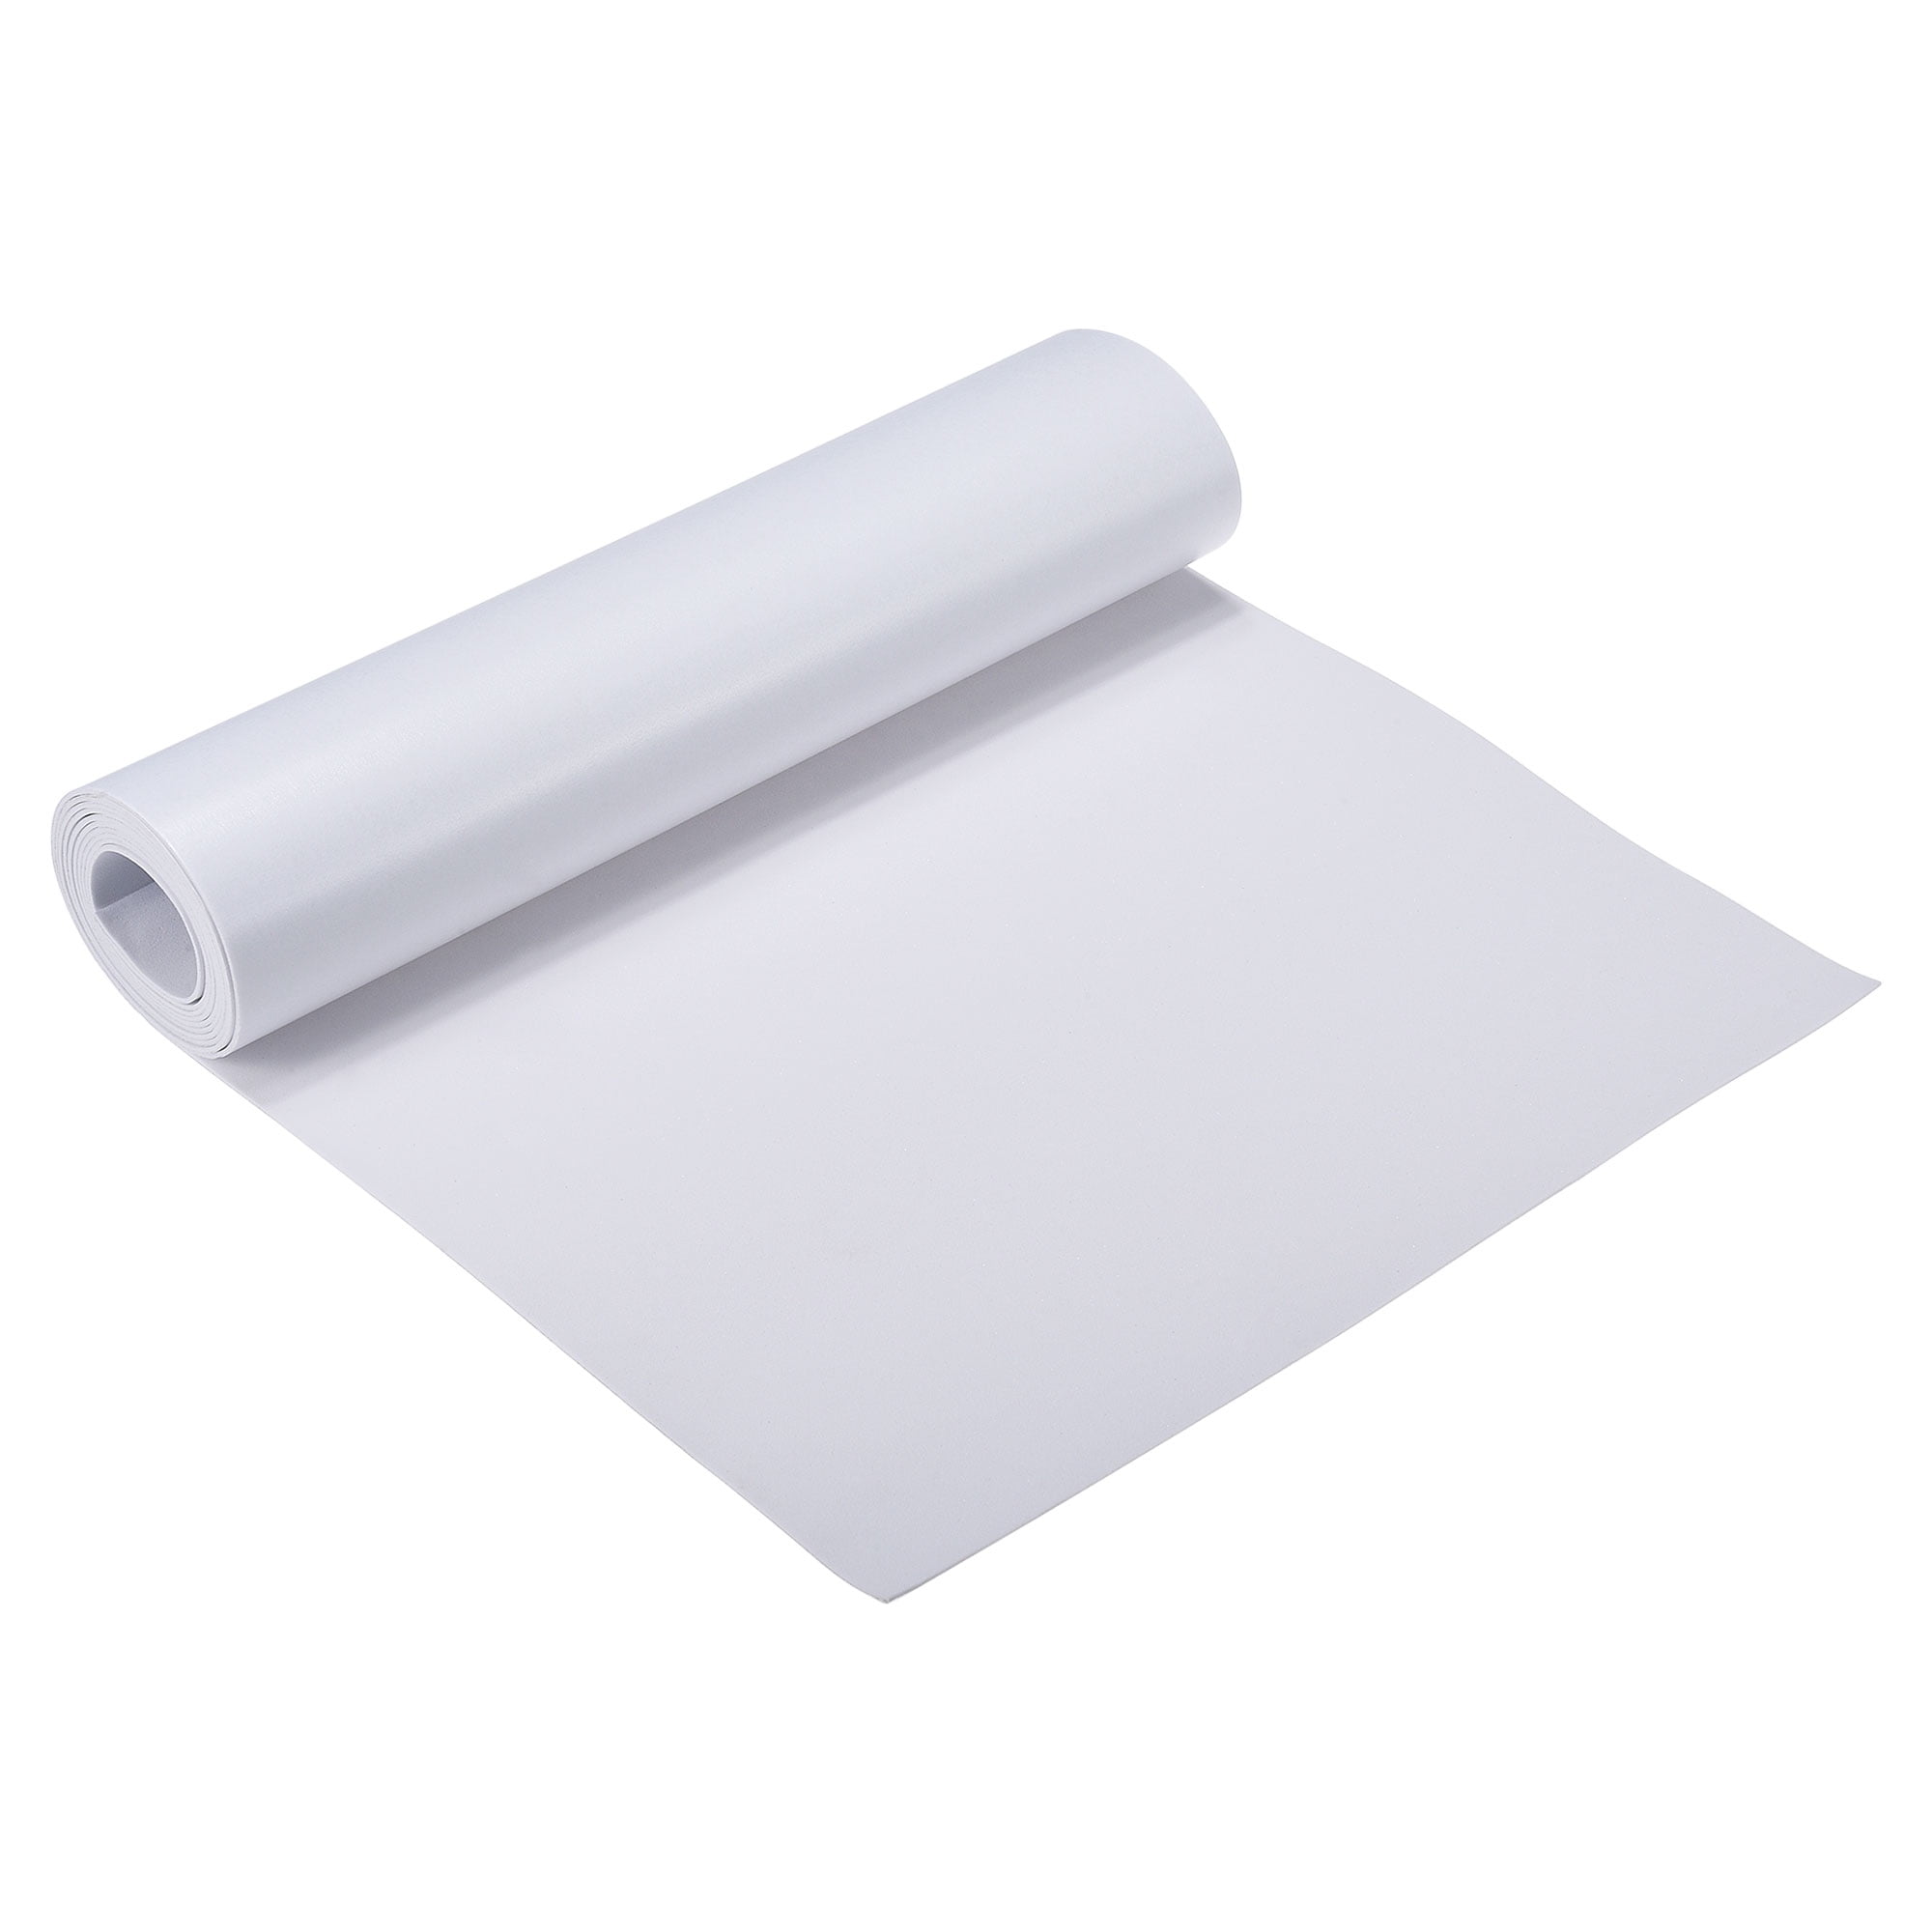  Foam Sheets Self Adhesive, 40 Pack - 6x9 Sticky Back